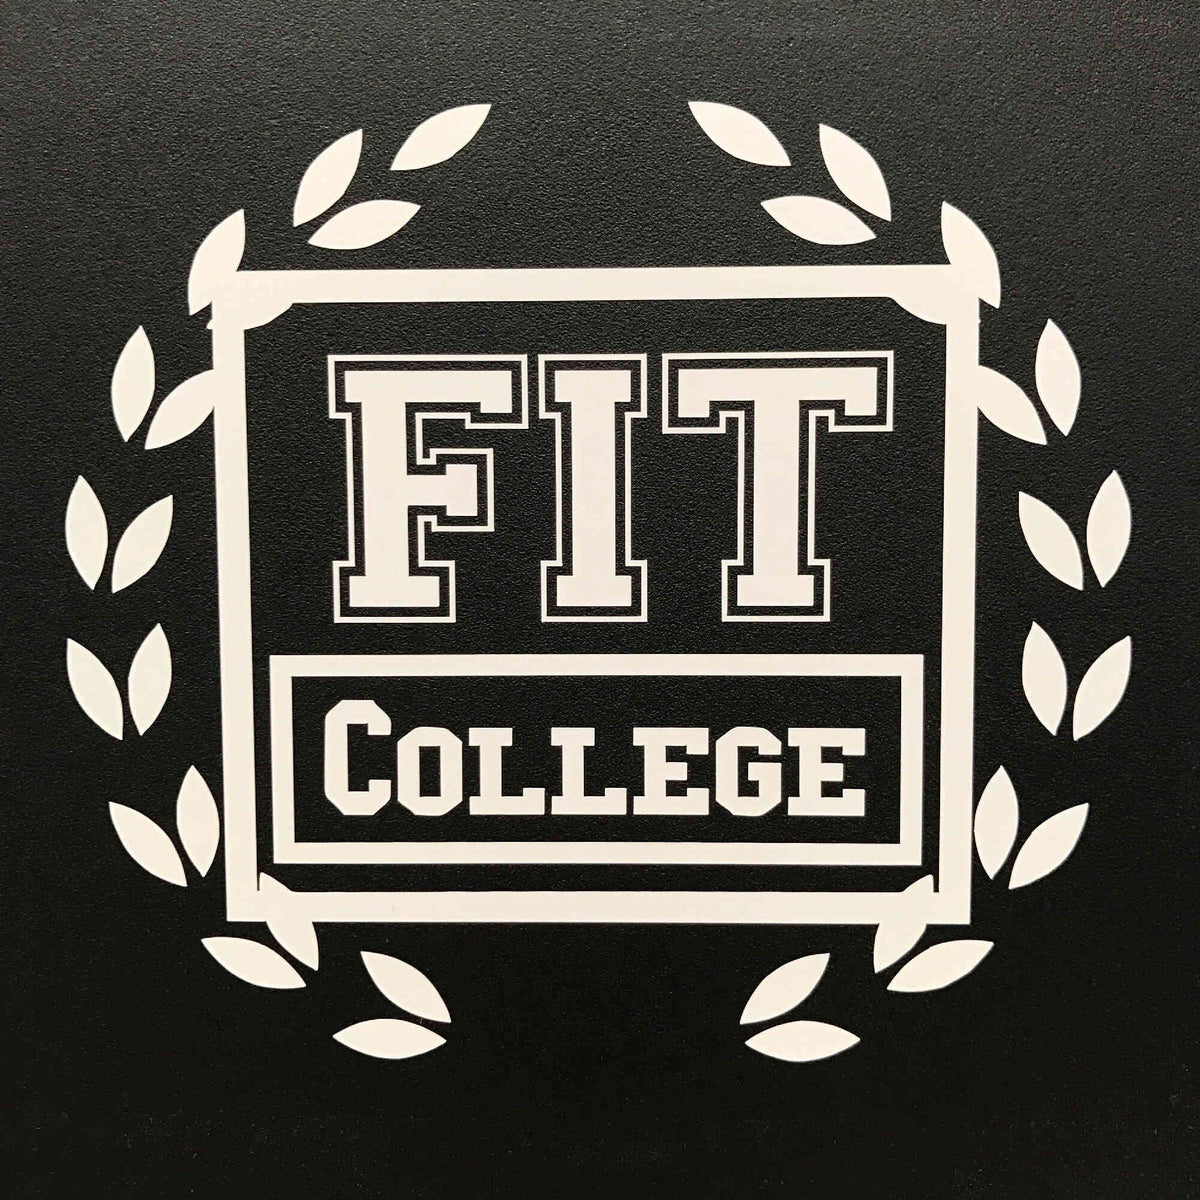 White FIT College lettering logo with wreath decal on black surface.